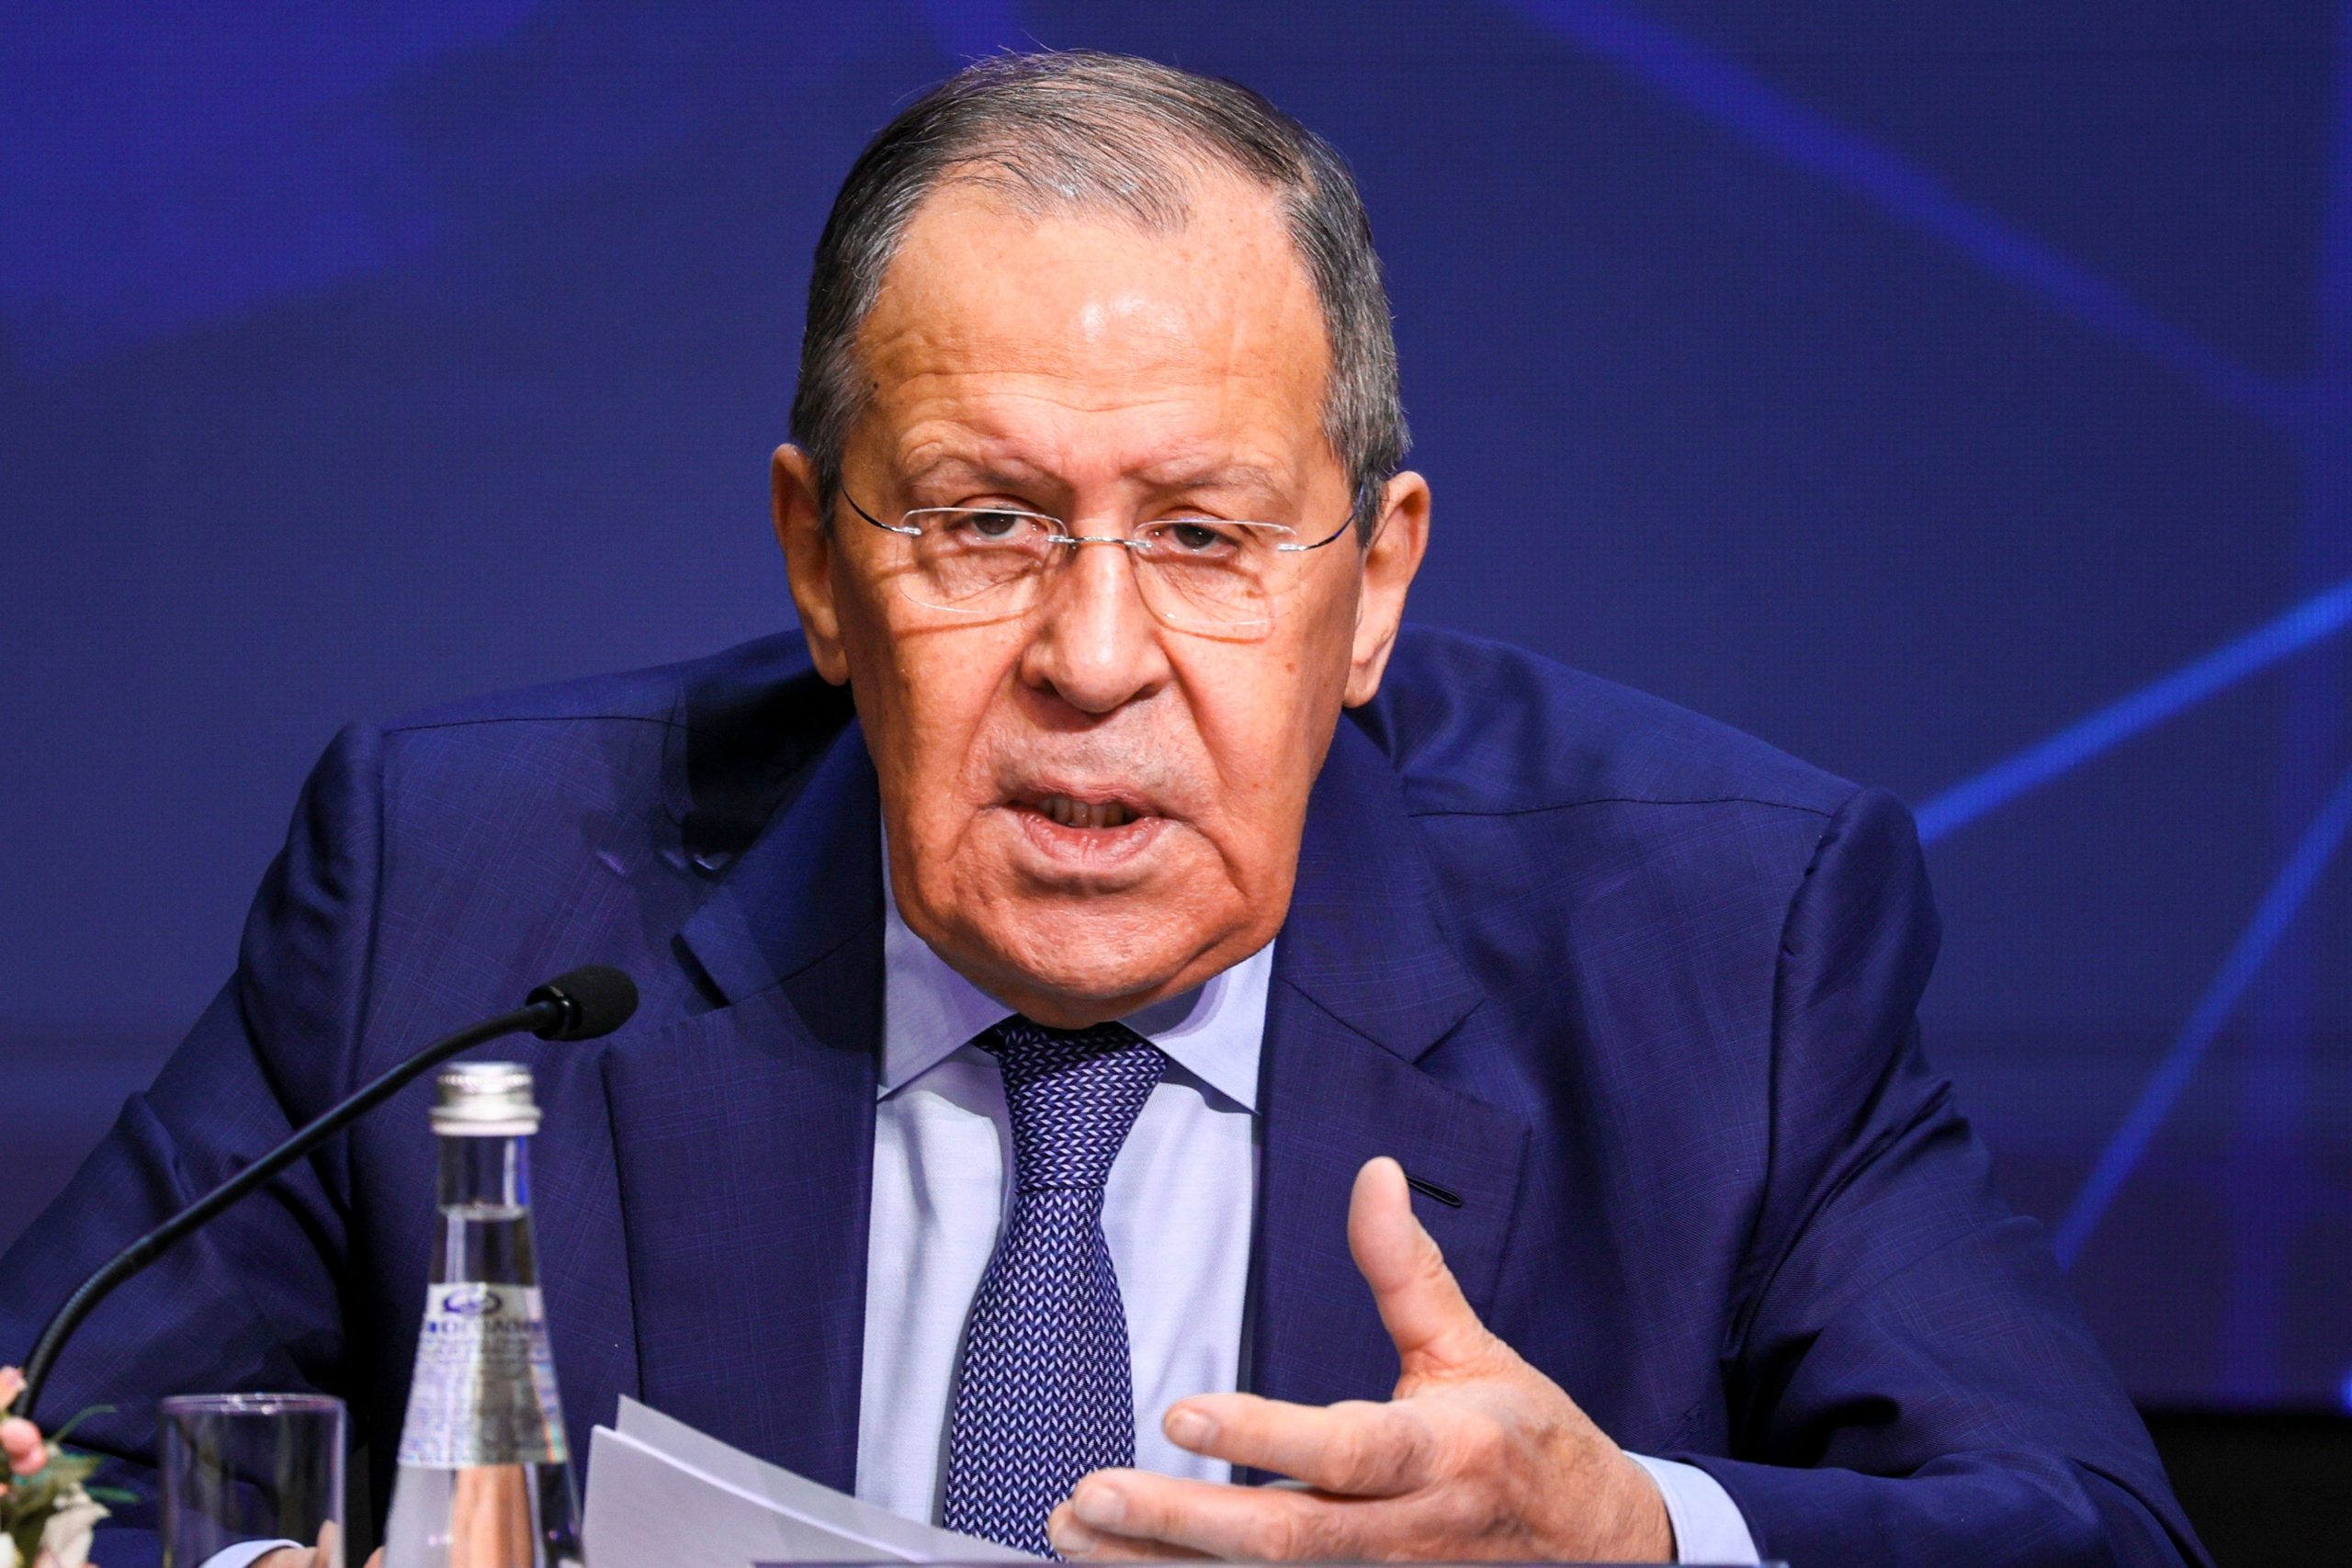 May 9 unimportant for military action in Ukraine, says Russia’s Lavrov